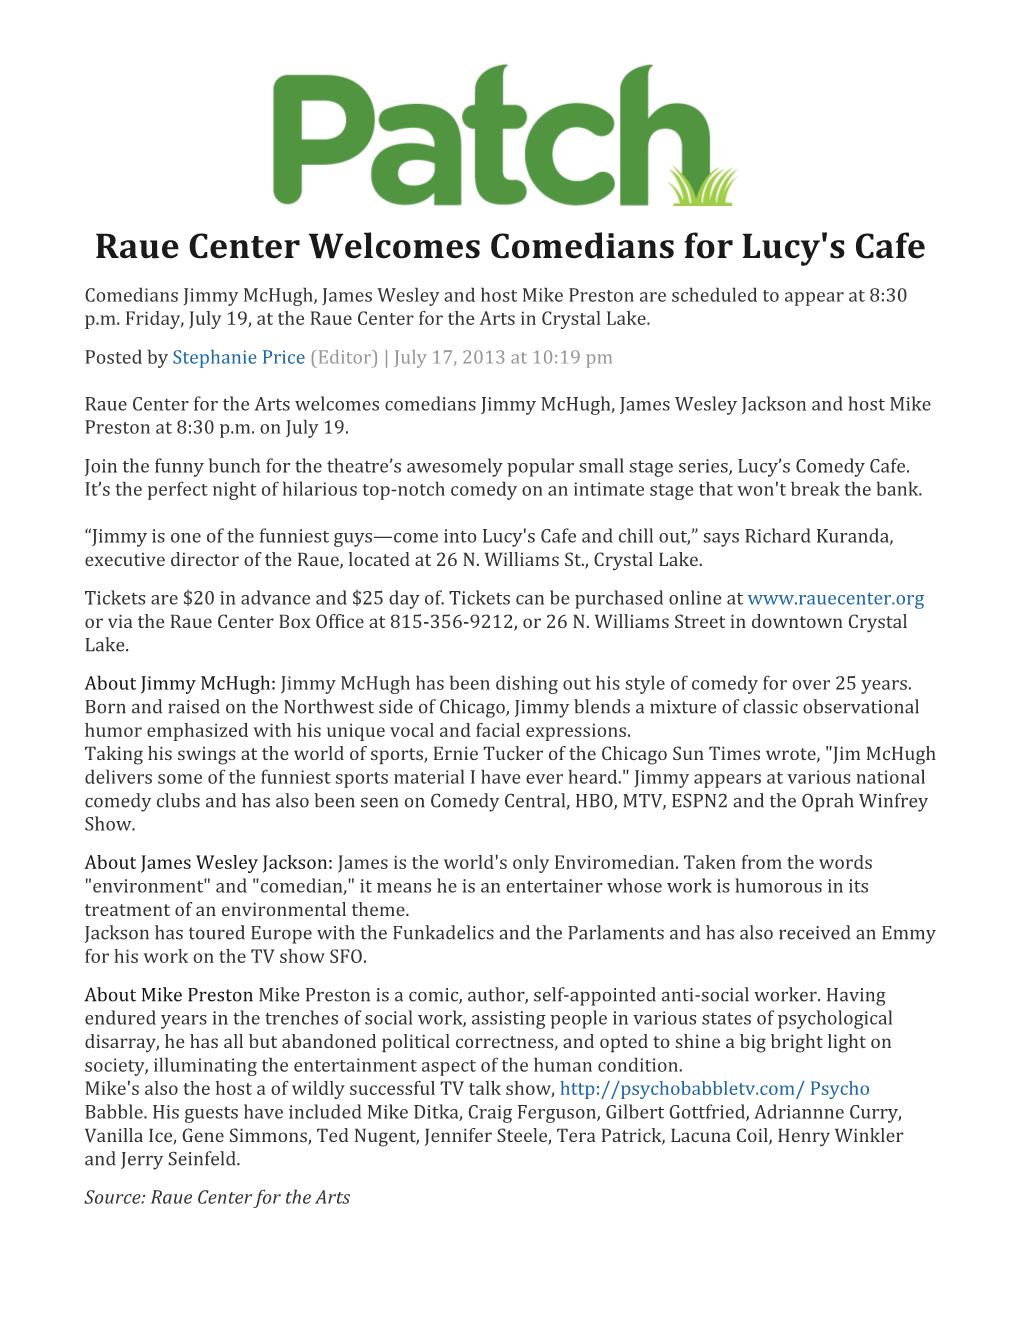 Raue Center Welcomes Comedians for Lucy's Cafe Comedians Jimmy Mchugh, James Wesley and Host Mike Preston Are Scheduled to Appear at 8:30 P.M